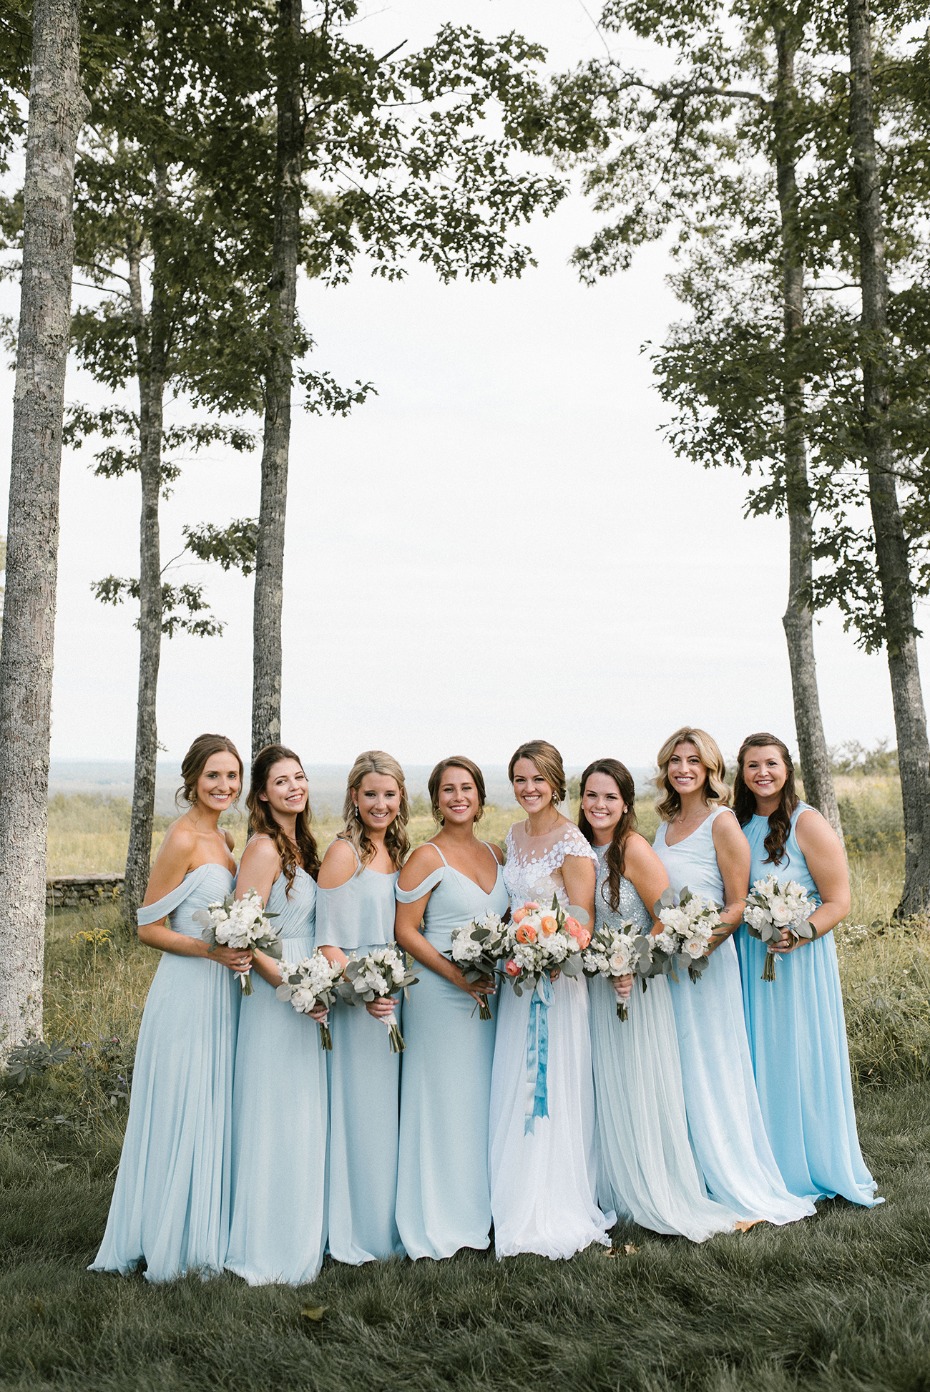 Mix and match bridesmaid dresses in light blue